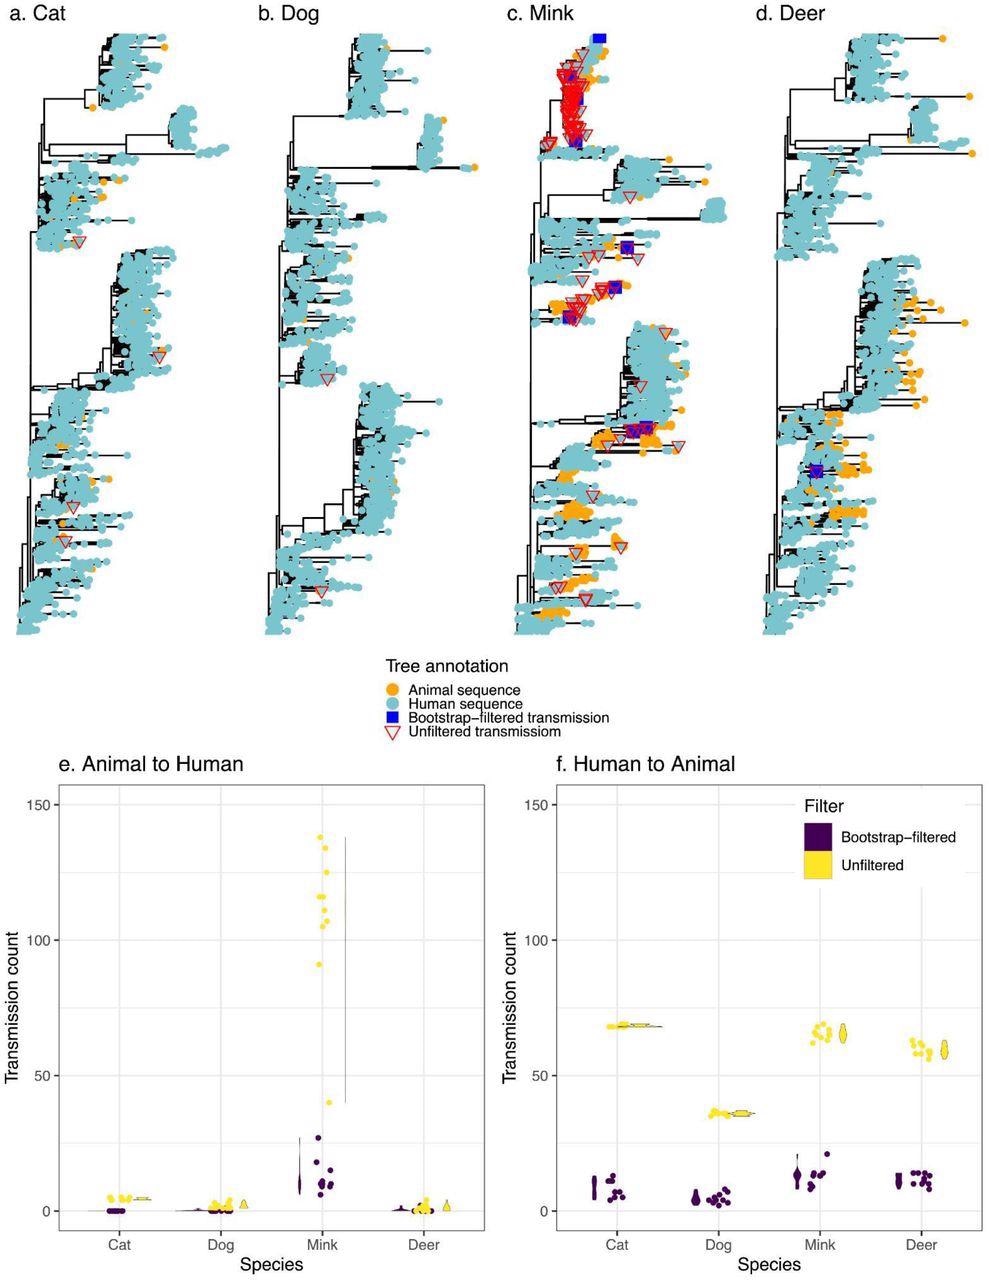 Transmission events inferred between humans and animals. Panels a-d display a representative tree for every species with animal to human transmissions marked on the tree. Trees are rooted with the Wuhan reference genome. Panels e and f display the distribution (violin plots alongside points plotted with jitter to avoid overlap) of inferred transmission counts (across 10 replicate trees) in each animal species, in both bootstrap-filtered and unfiltered trees.